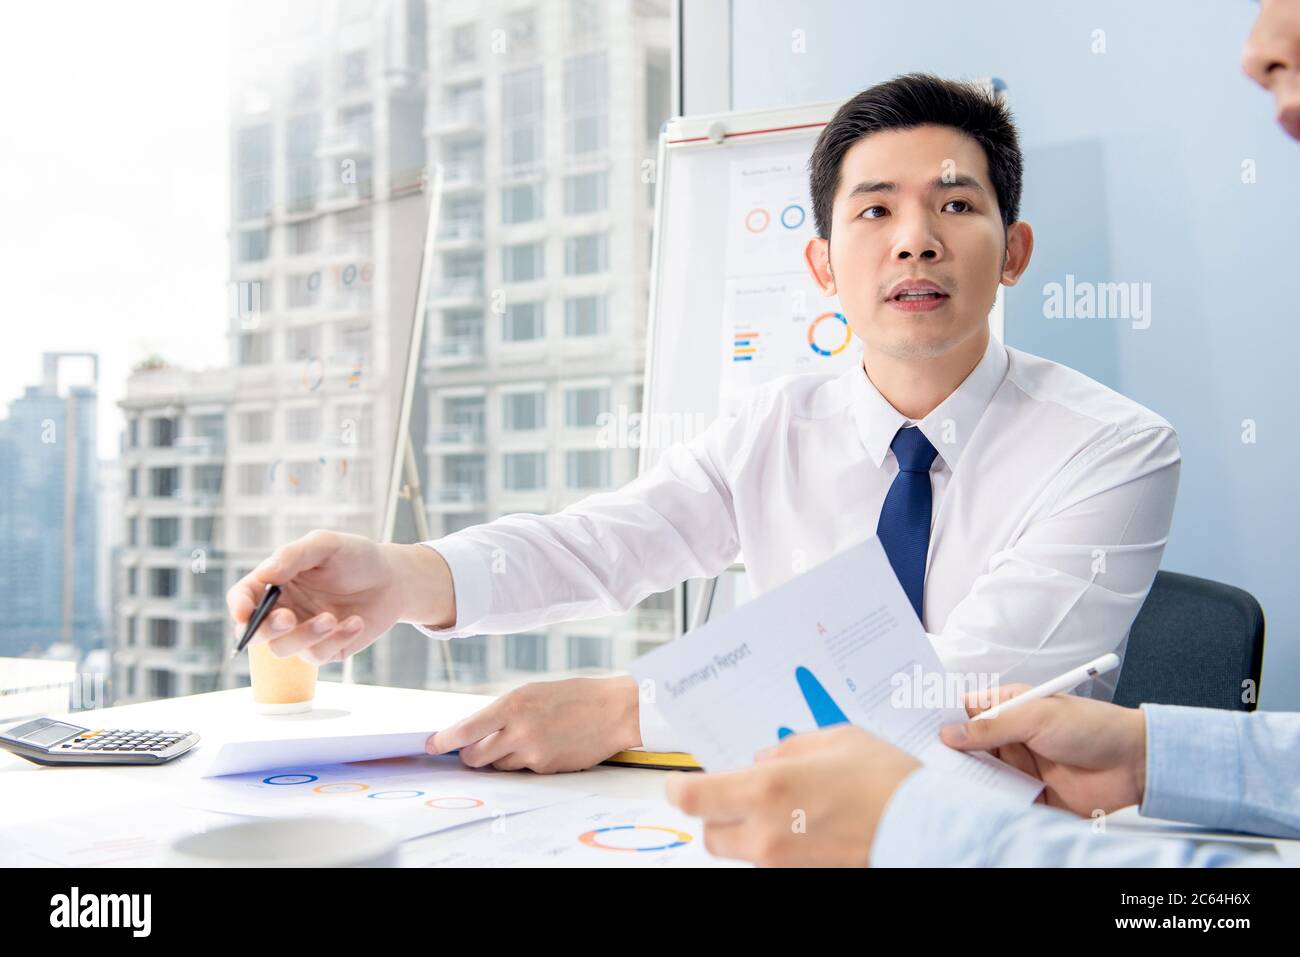 Portrait of serious busy young Asian businessman analyzing data in an office meeting with colleague in urban setting Stock Photo